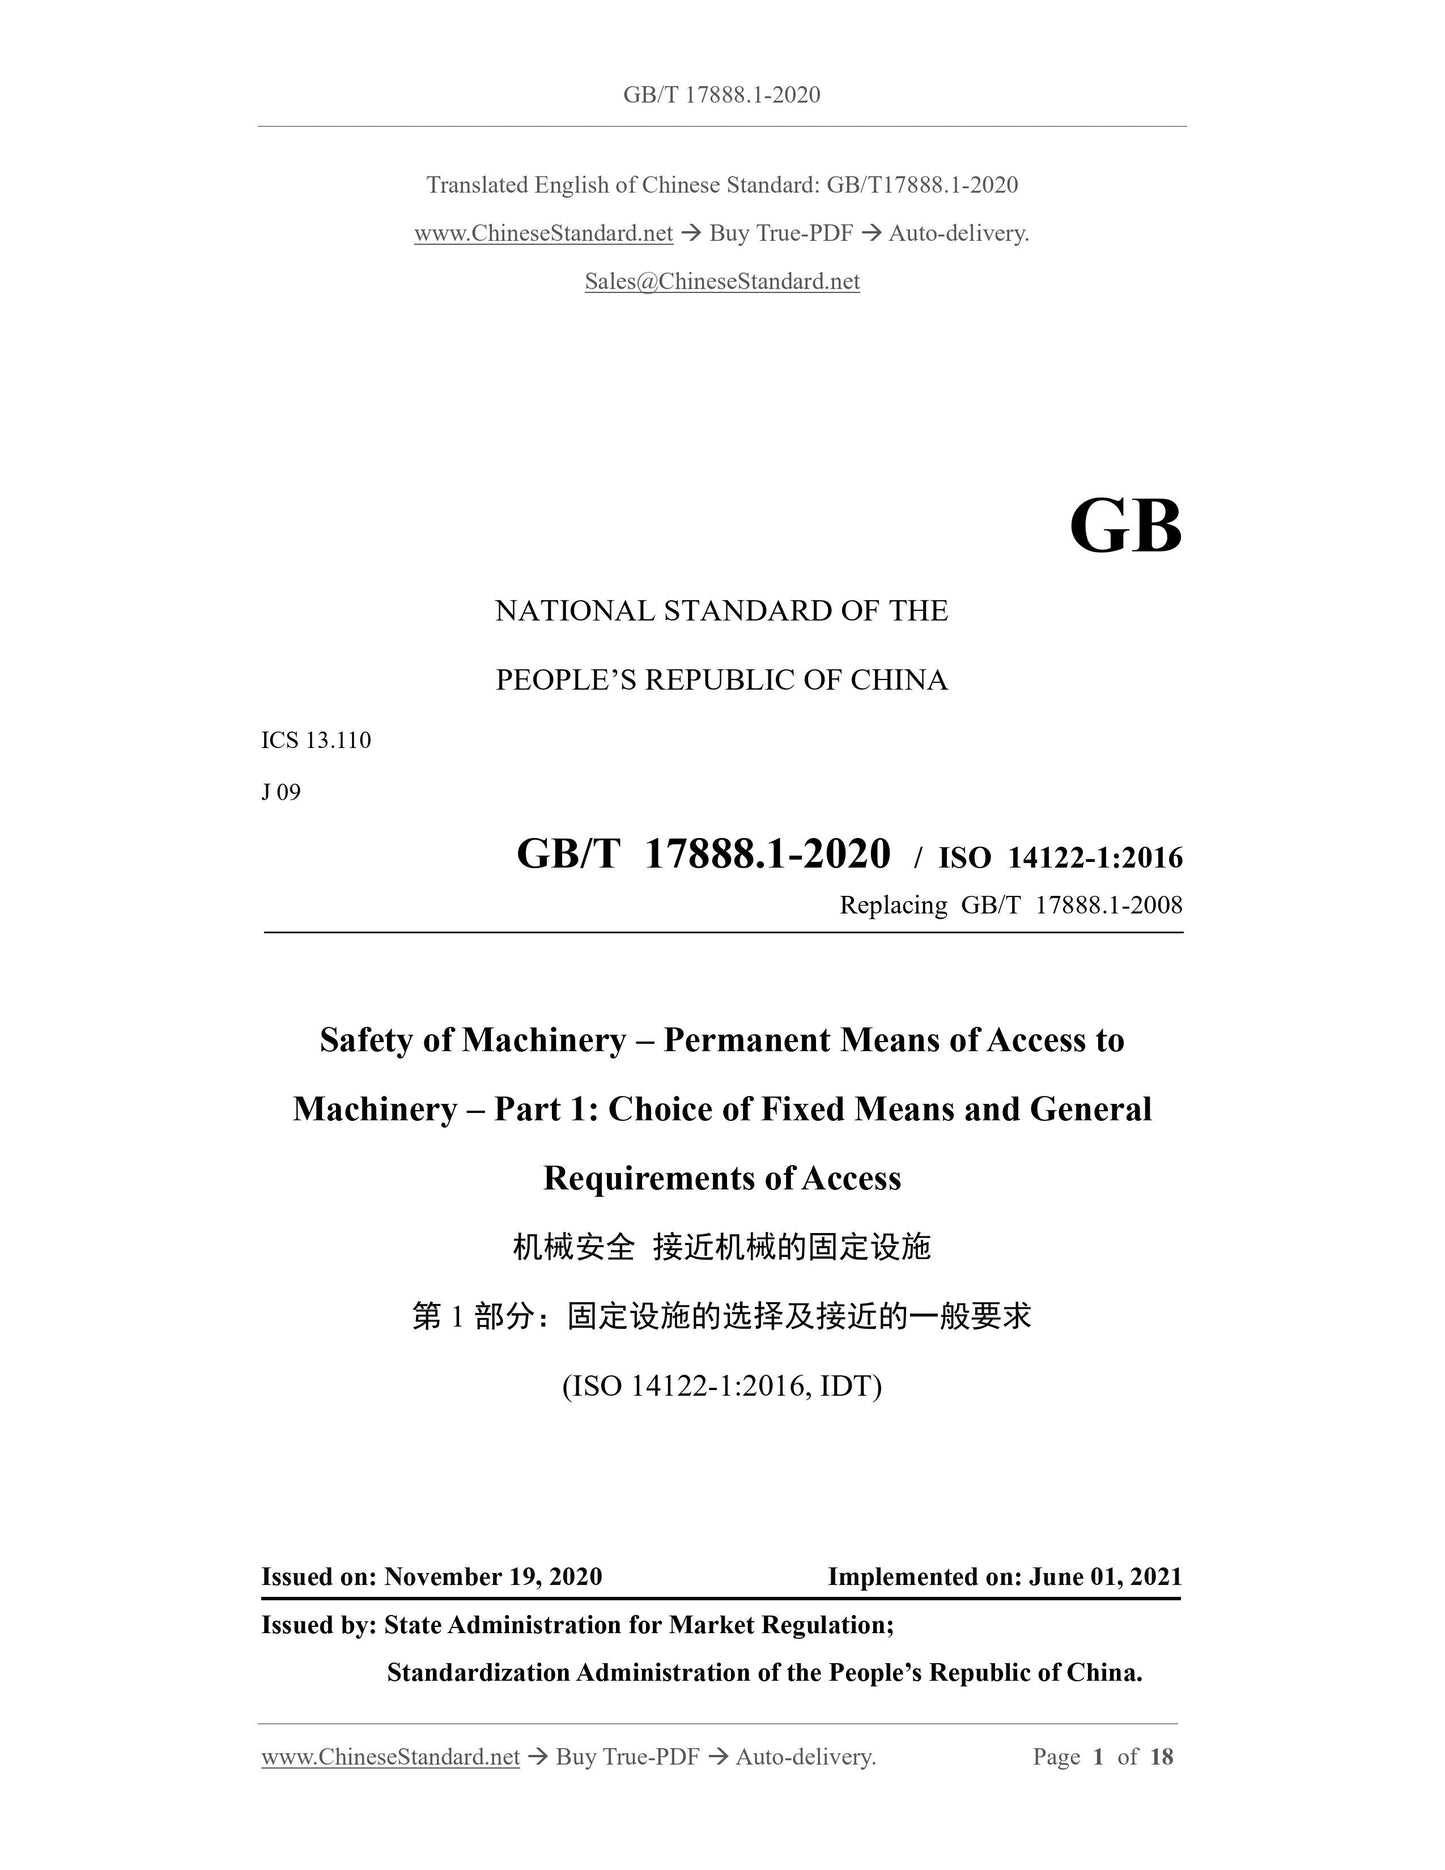 GB/T 17888.1-2020 Page 1